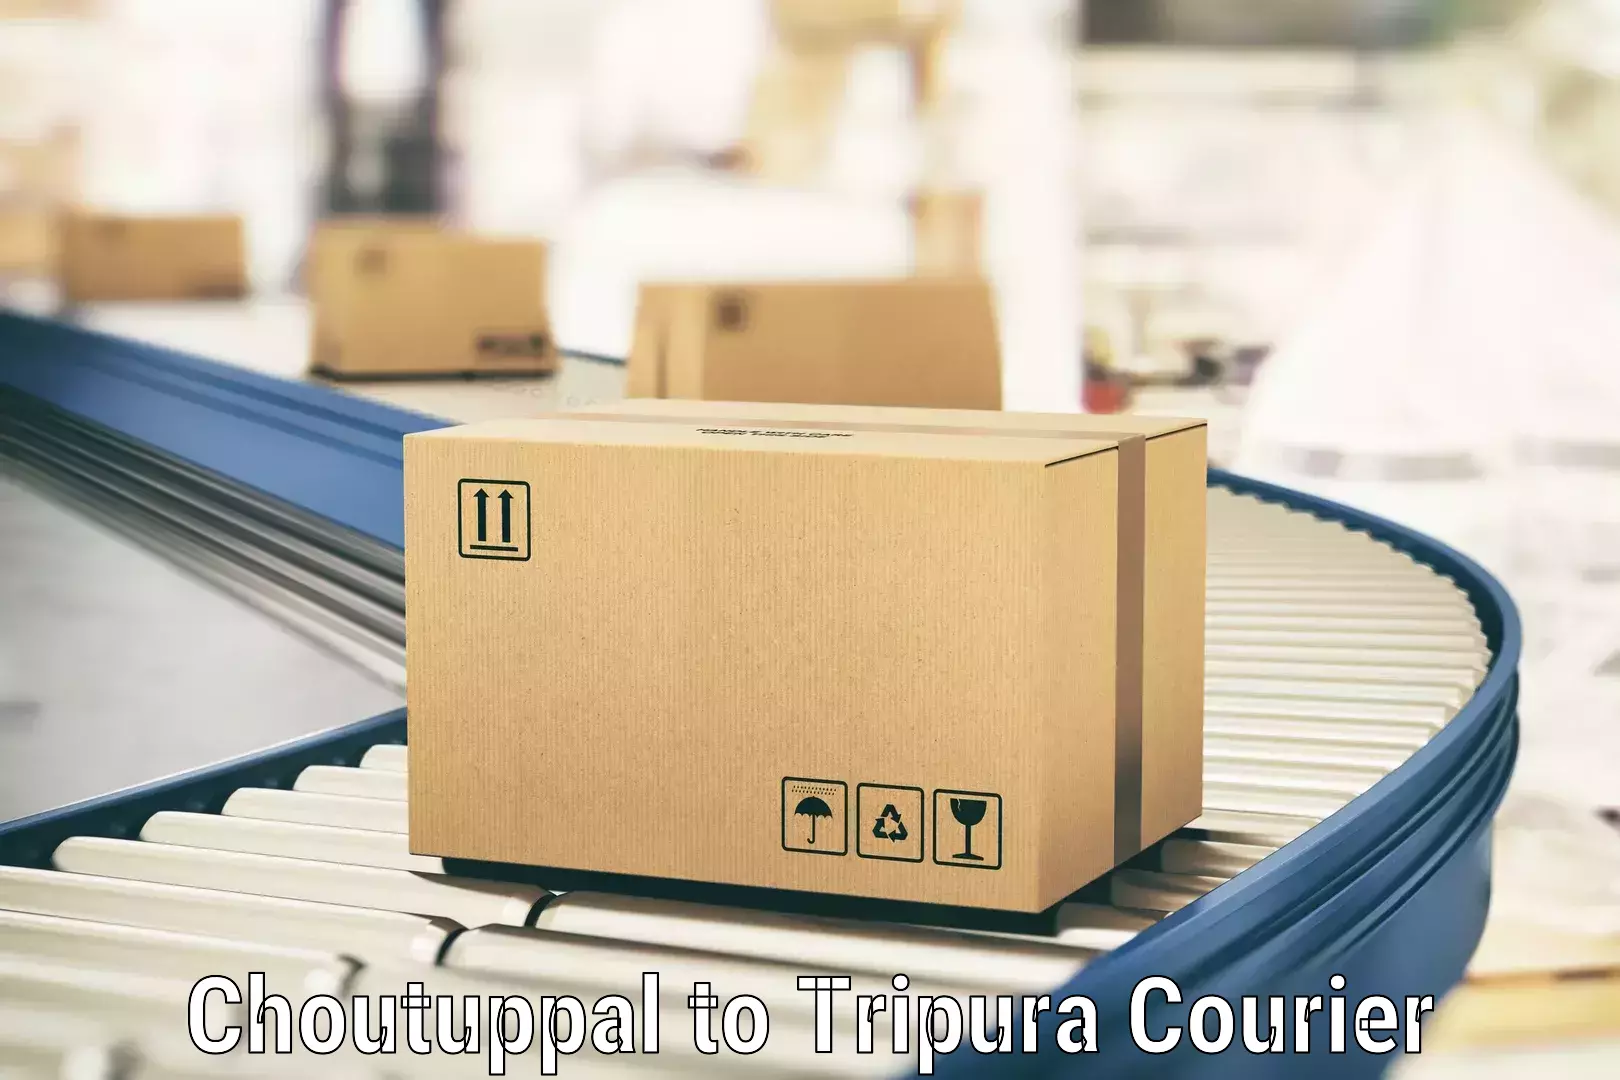 Full-service courier options Choutuppal to Udaipur Tripura